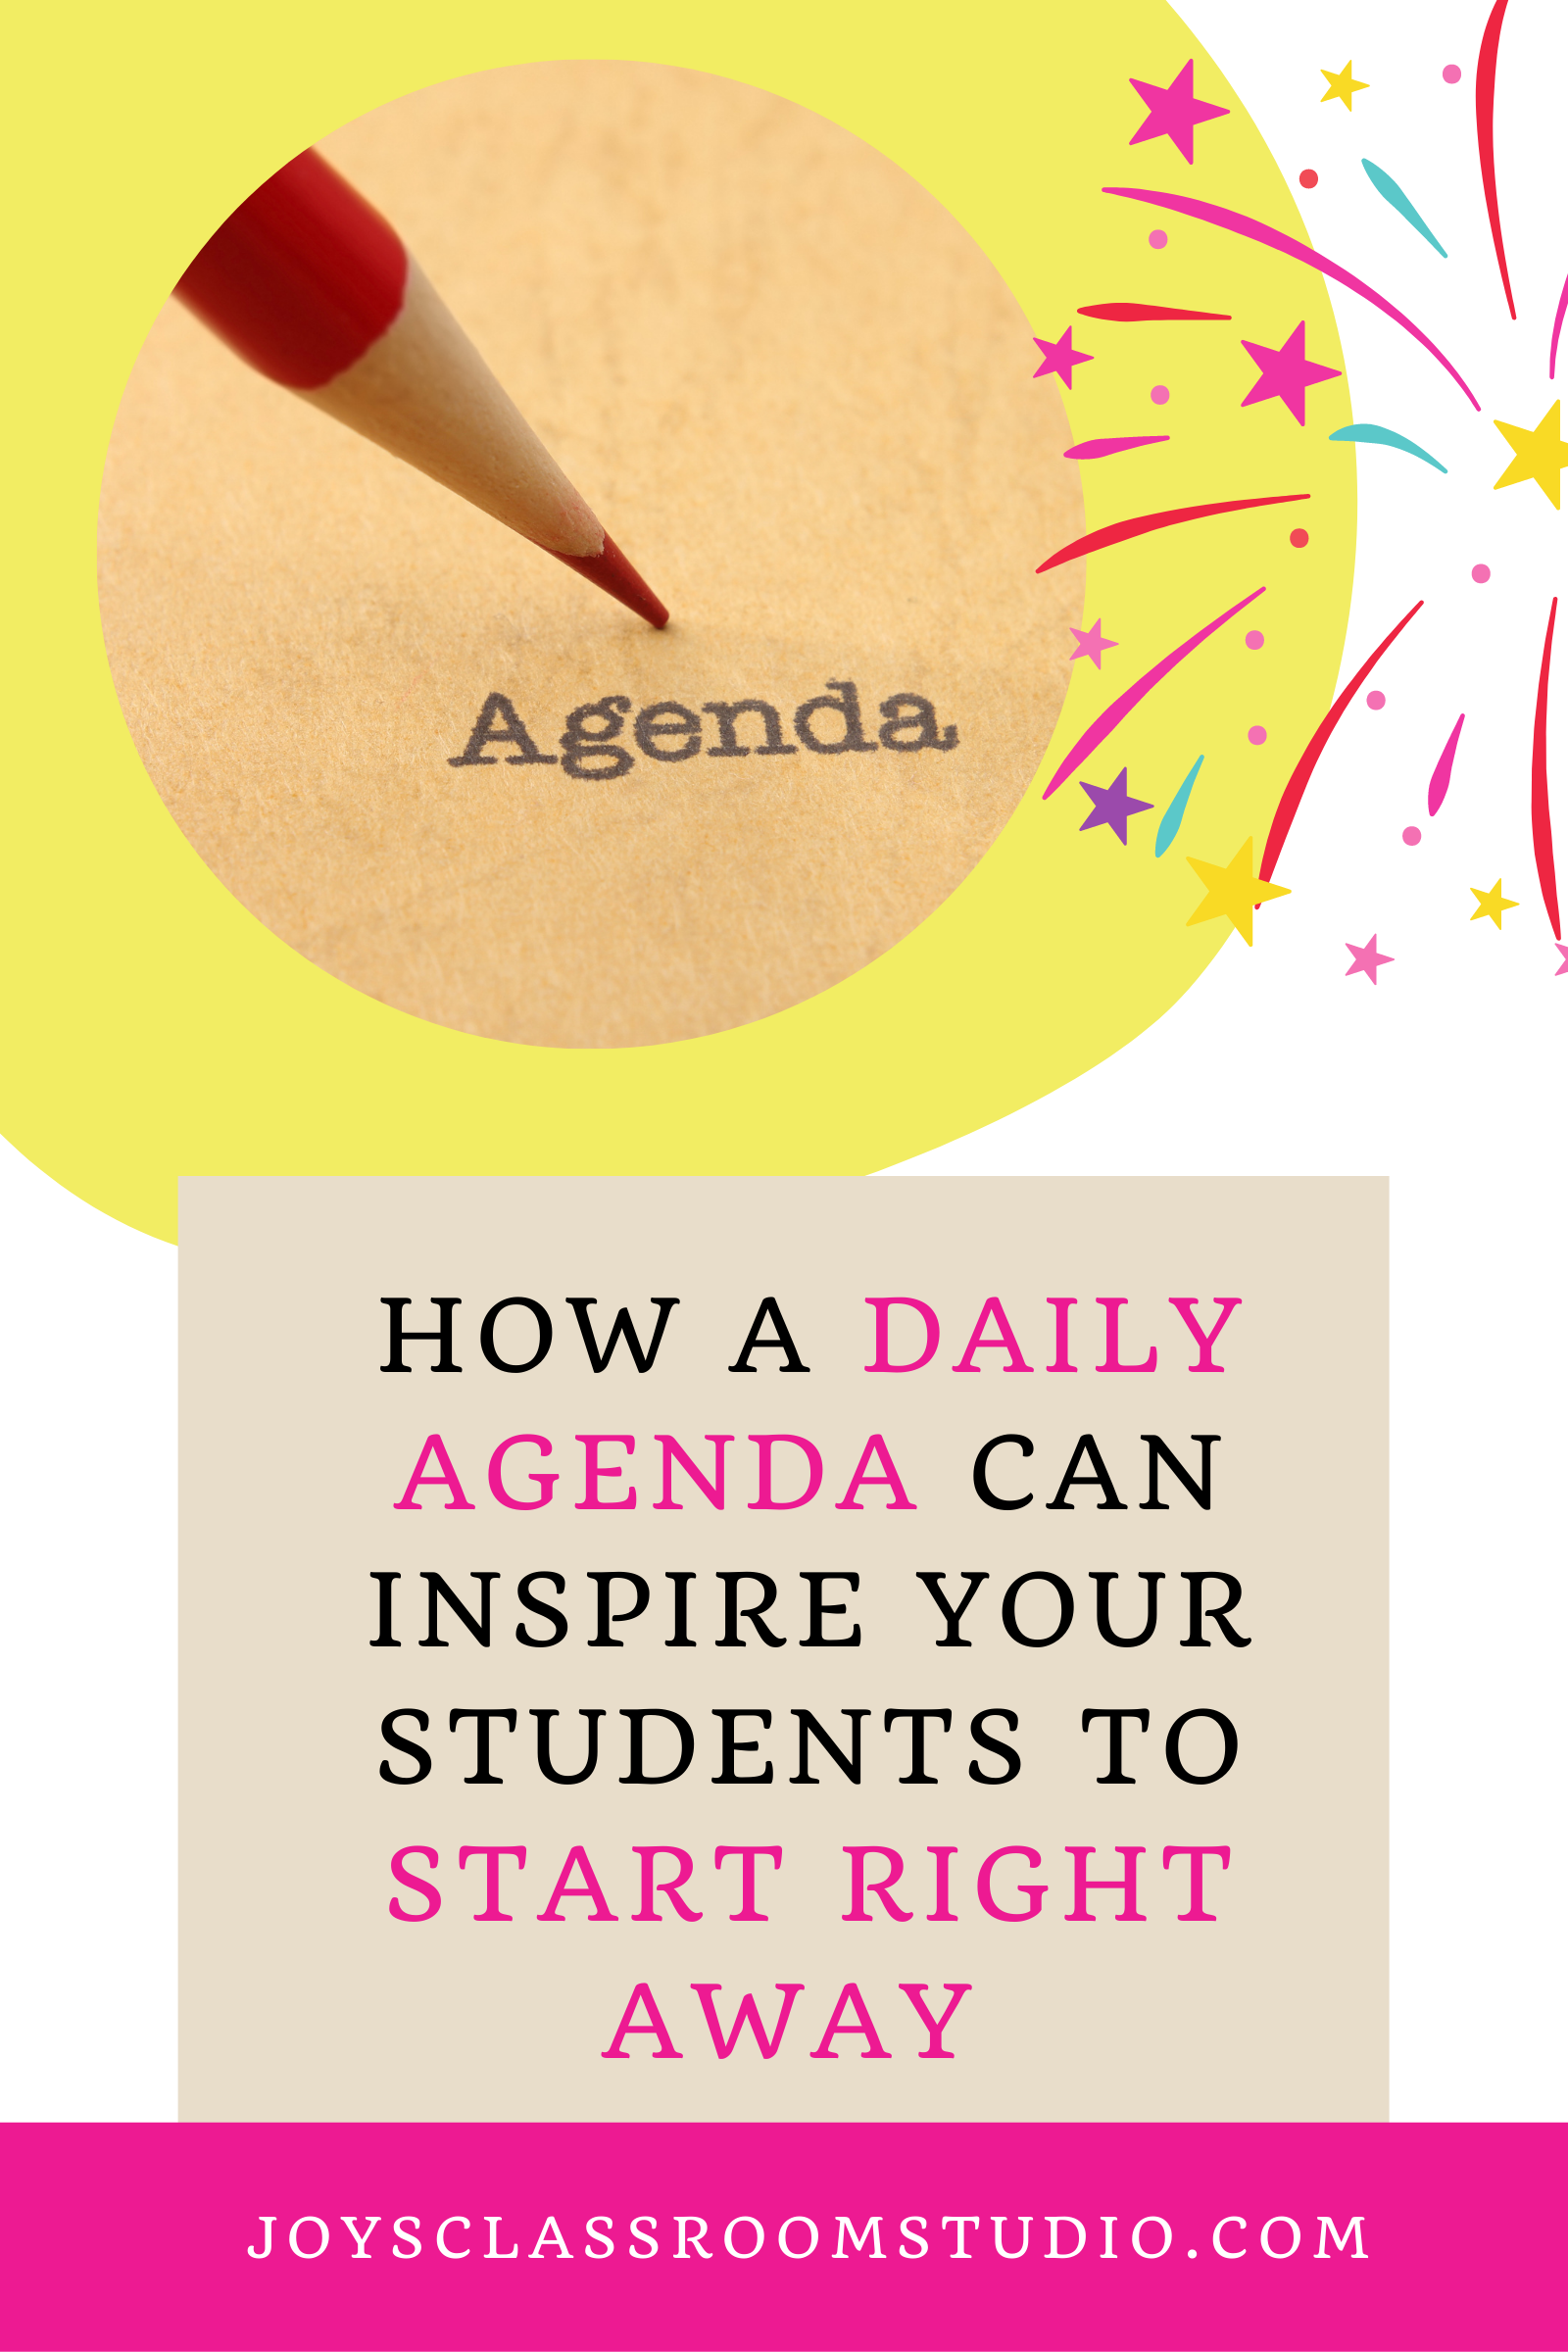 How a Daily Agenda Can Inspire Your Students To Start Right Away